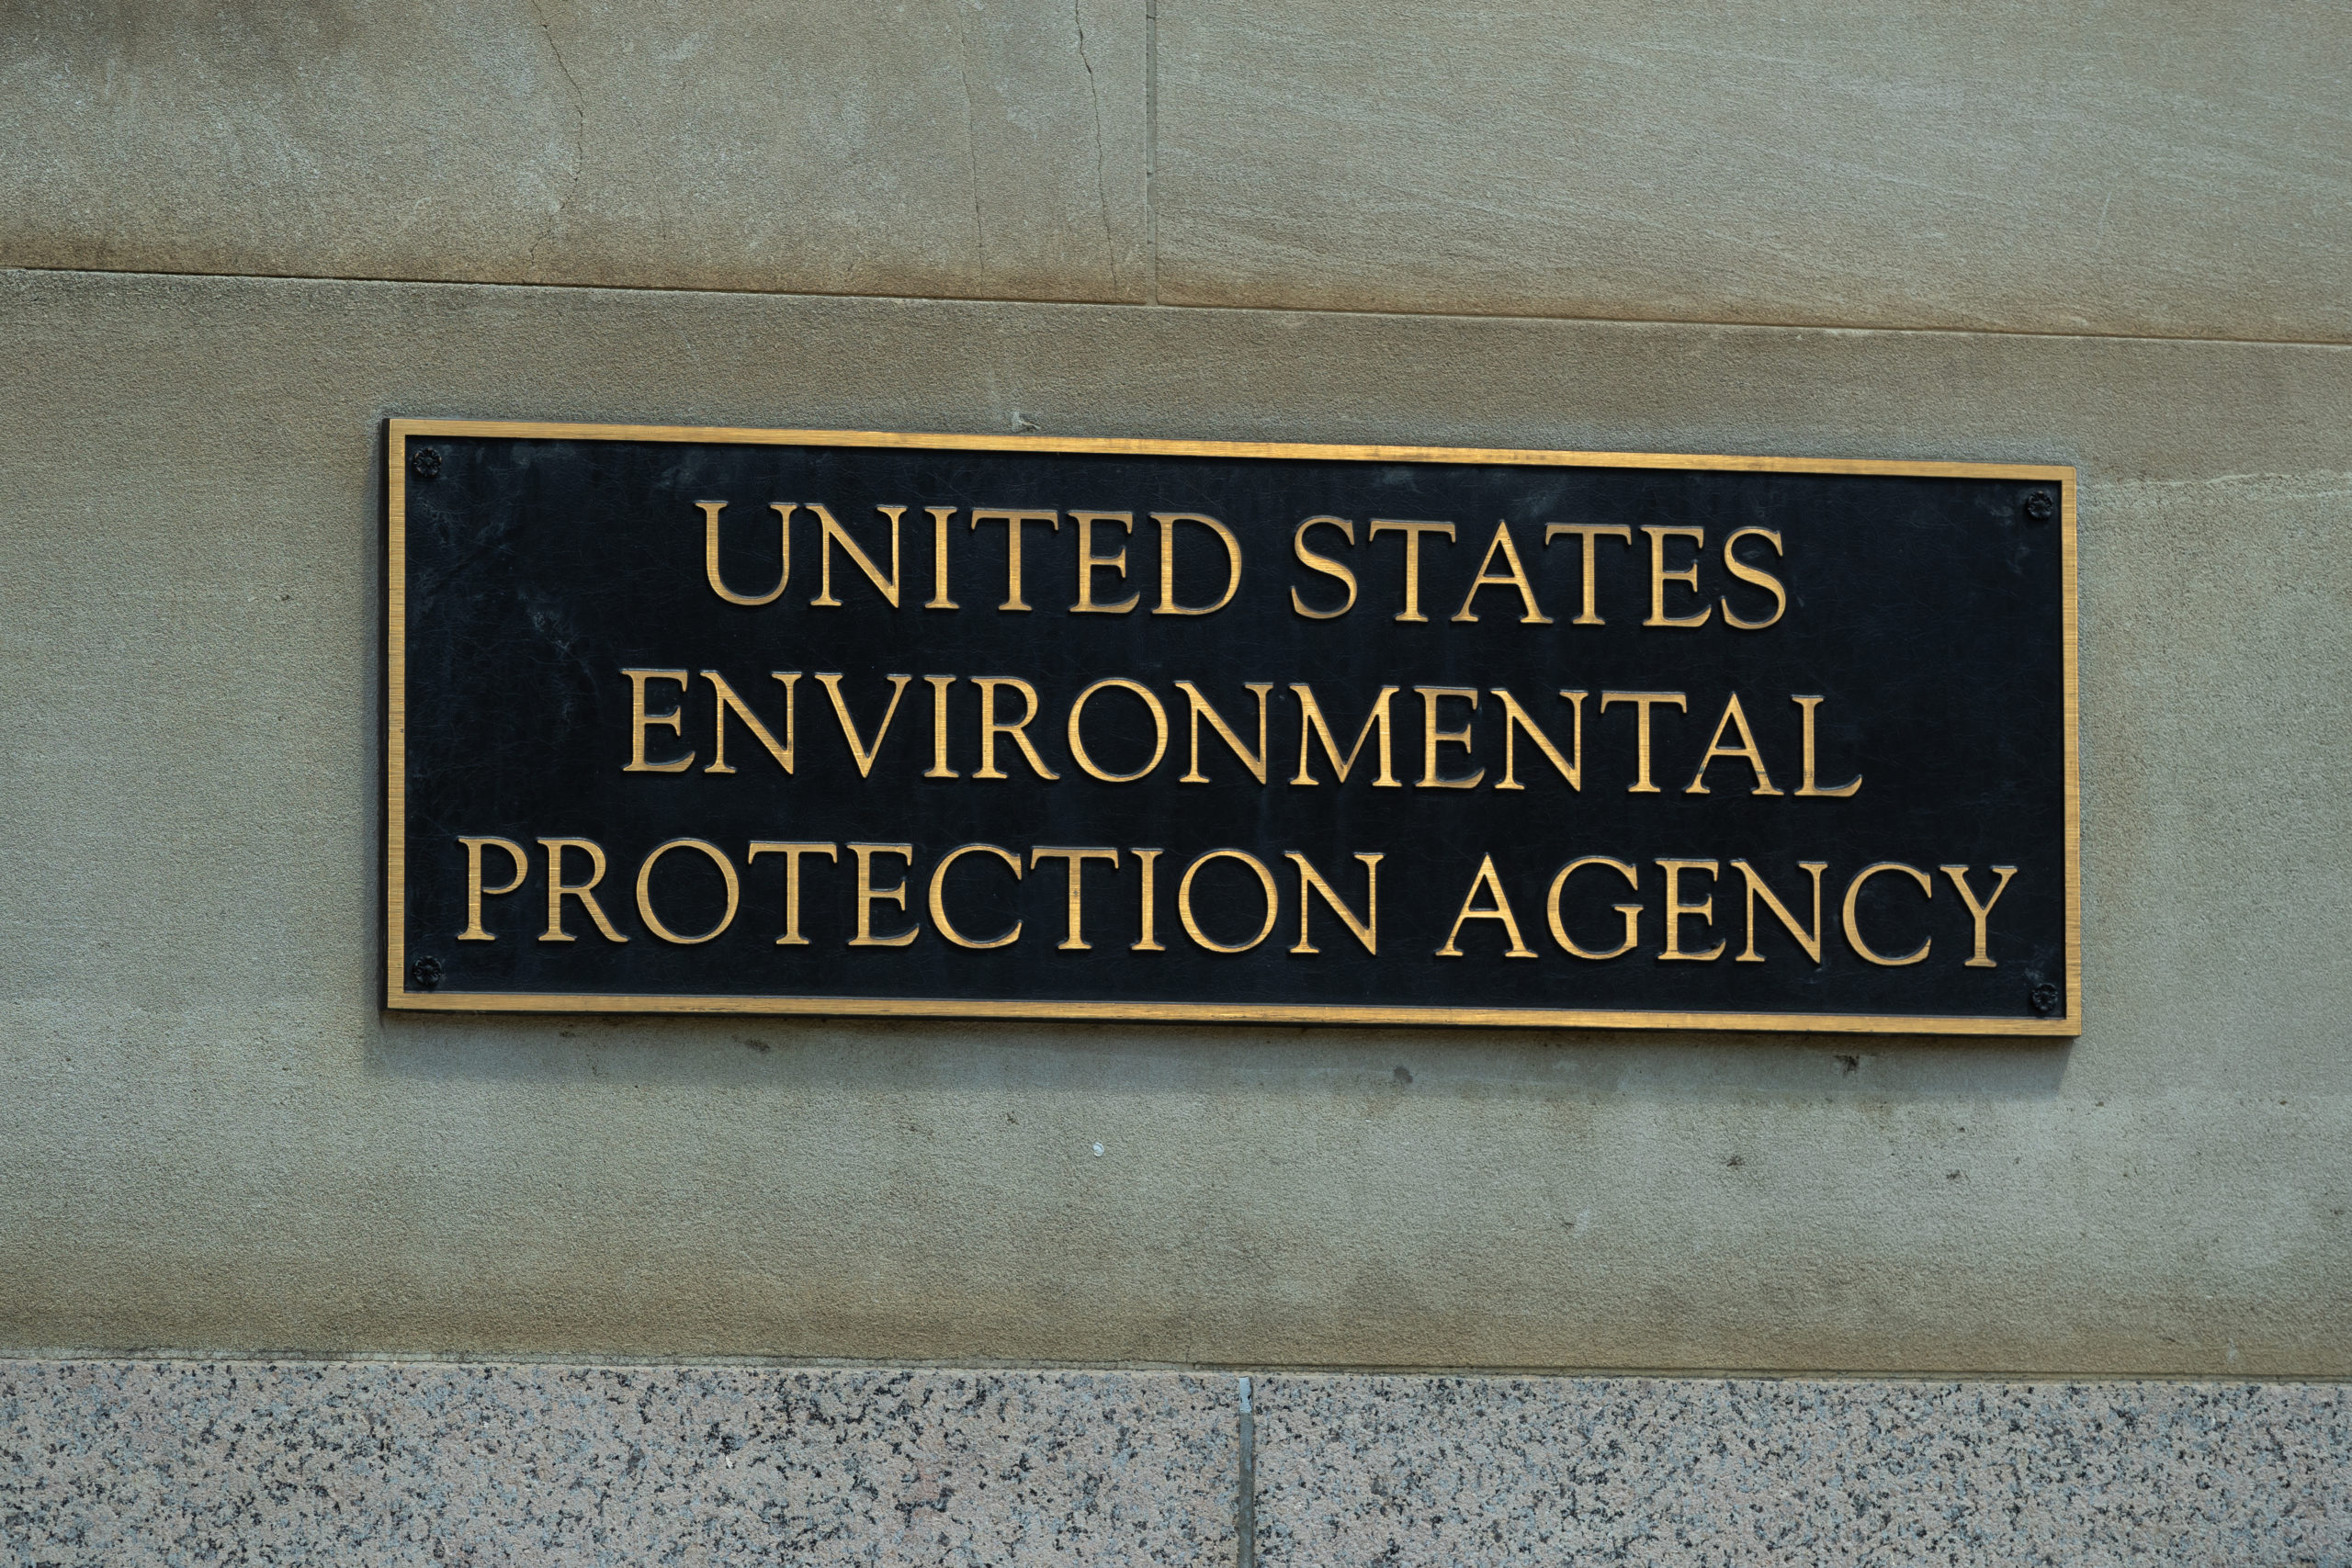 U.S. EPA Ordered to Introduce More Stringent Rules for Asbestos Data Collection